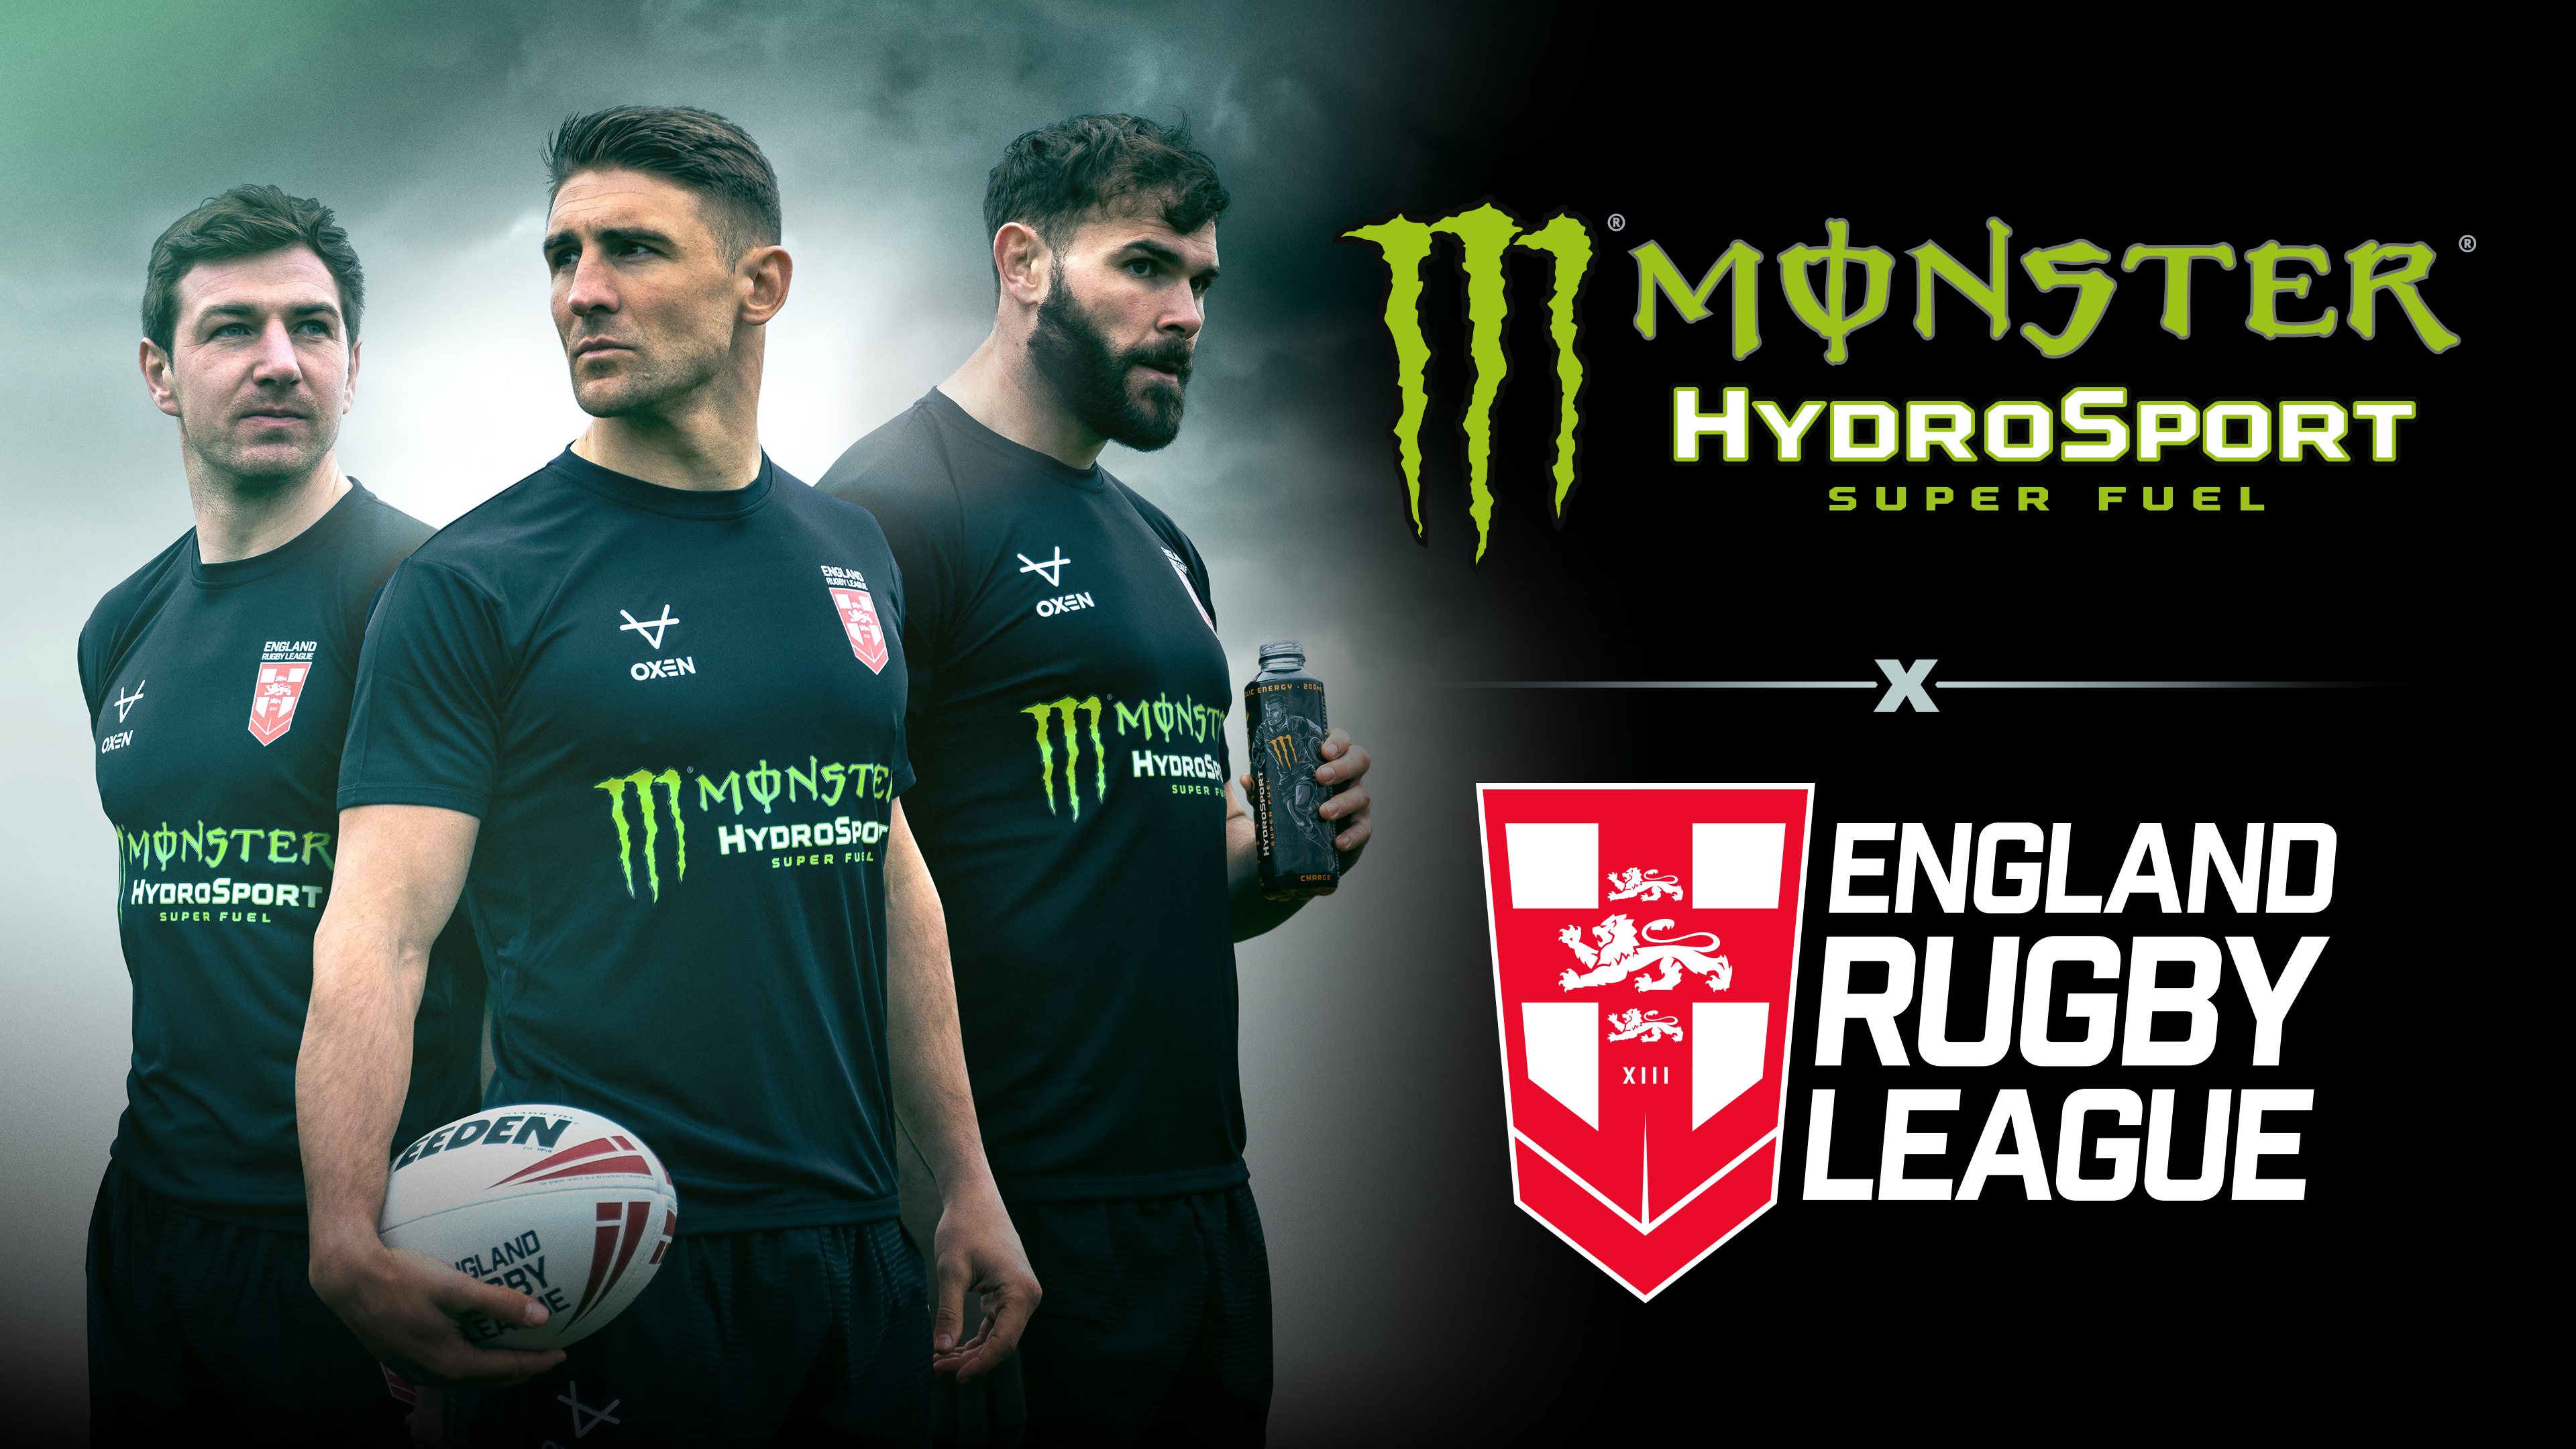 Monster Hydrosport teams up with England Rugby League